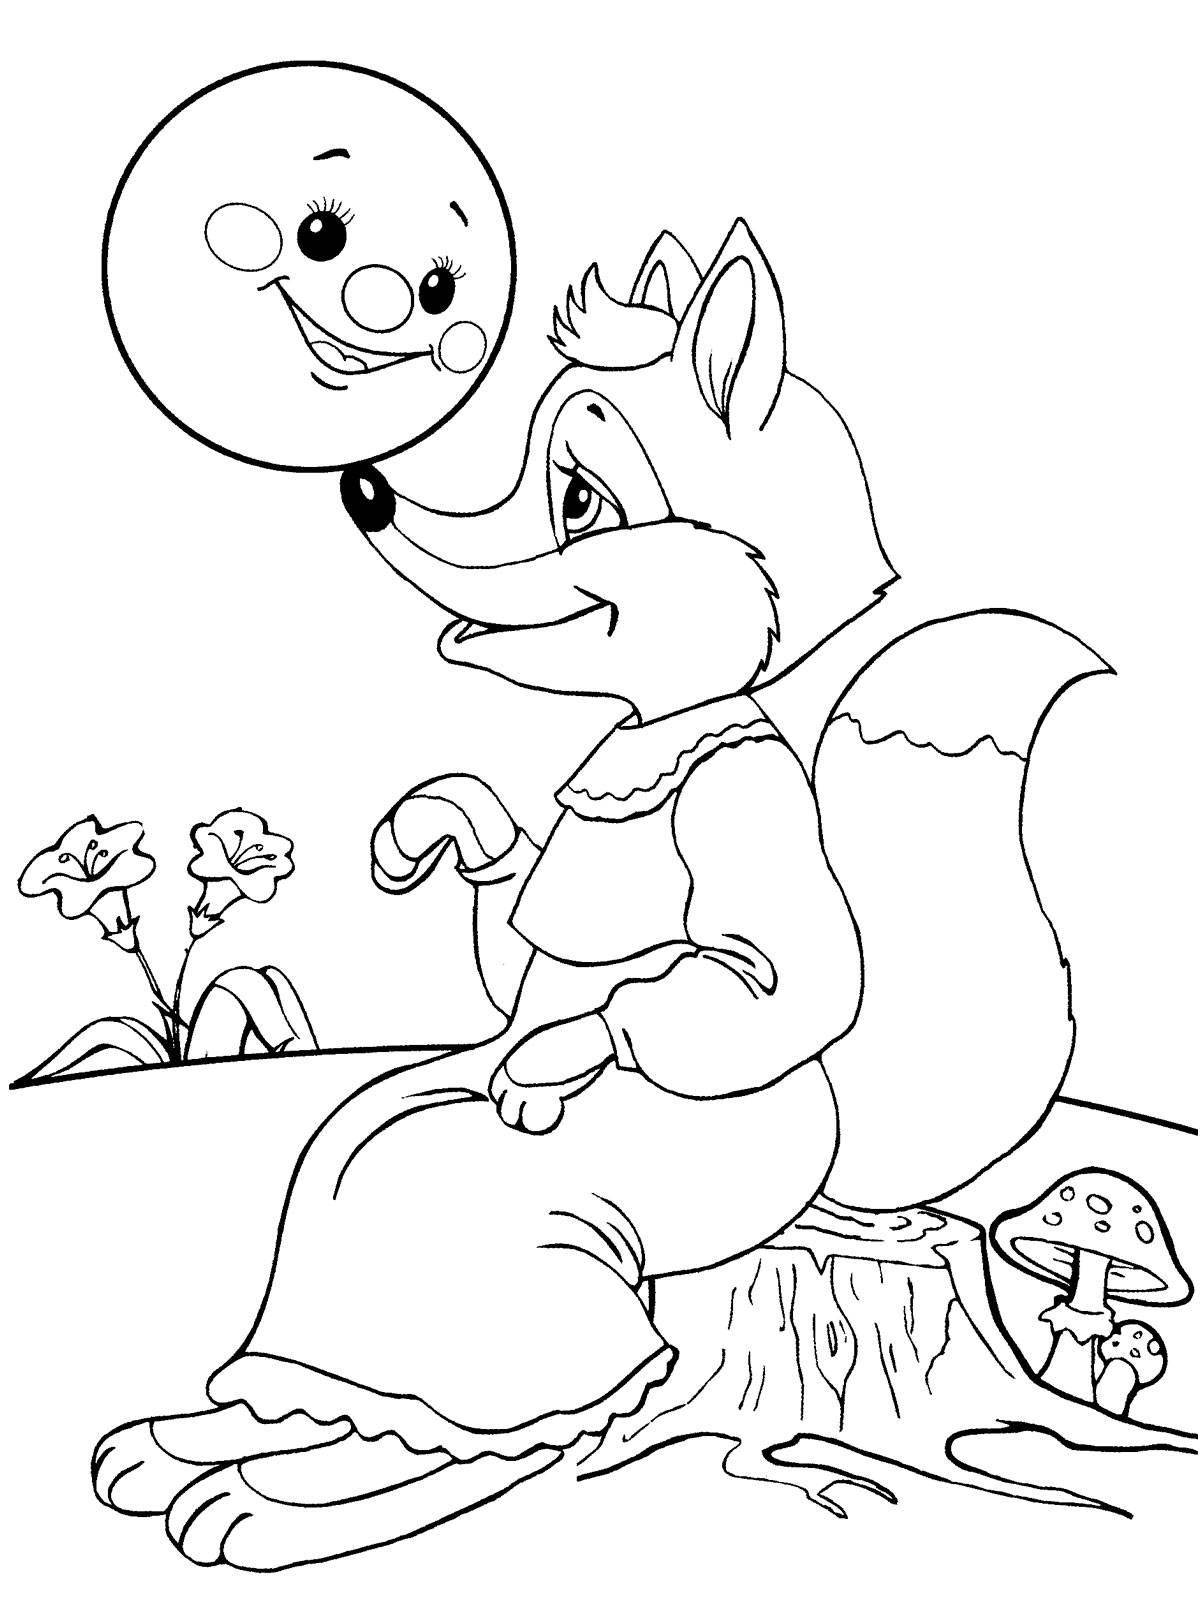 Fluffy wolf coloring page